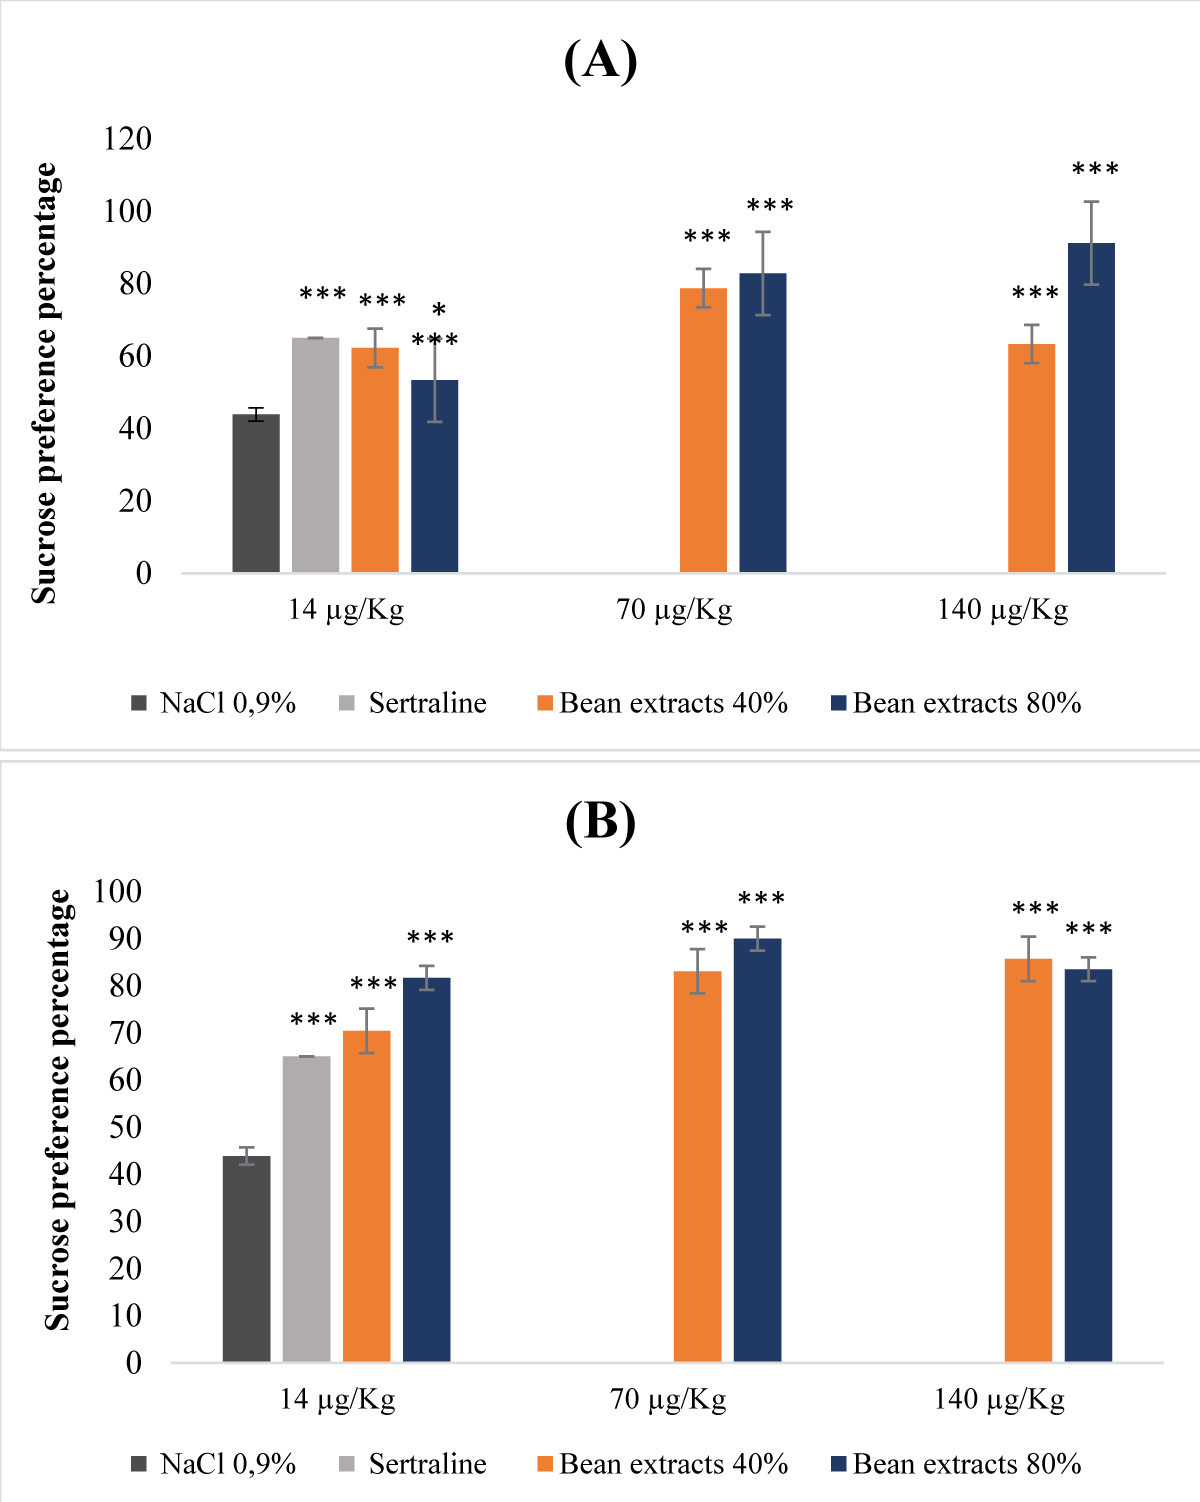 Antidepressant properties of protein extracts derived from beans. (A): Undenatured bean extracts; (B): Denatured bean extracts.